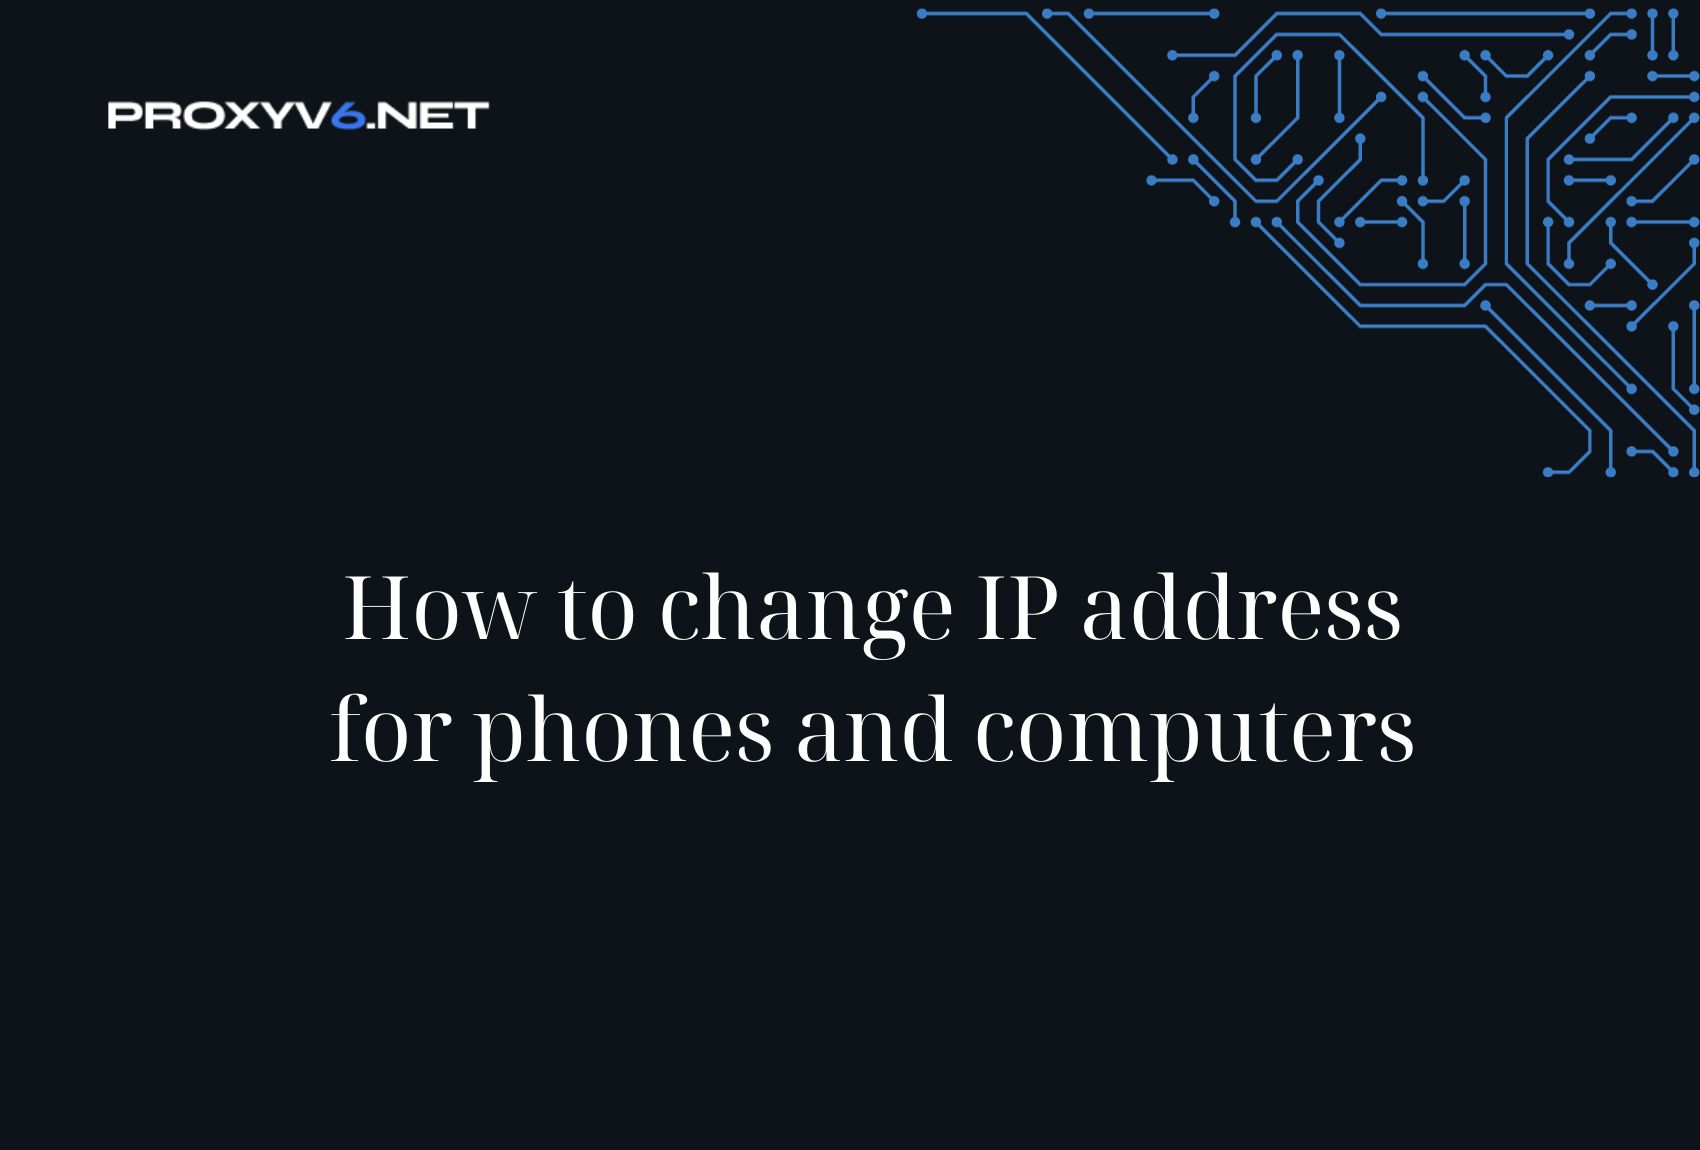 How to change IP address for phones and computers